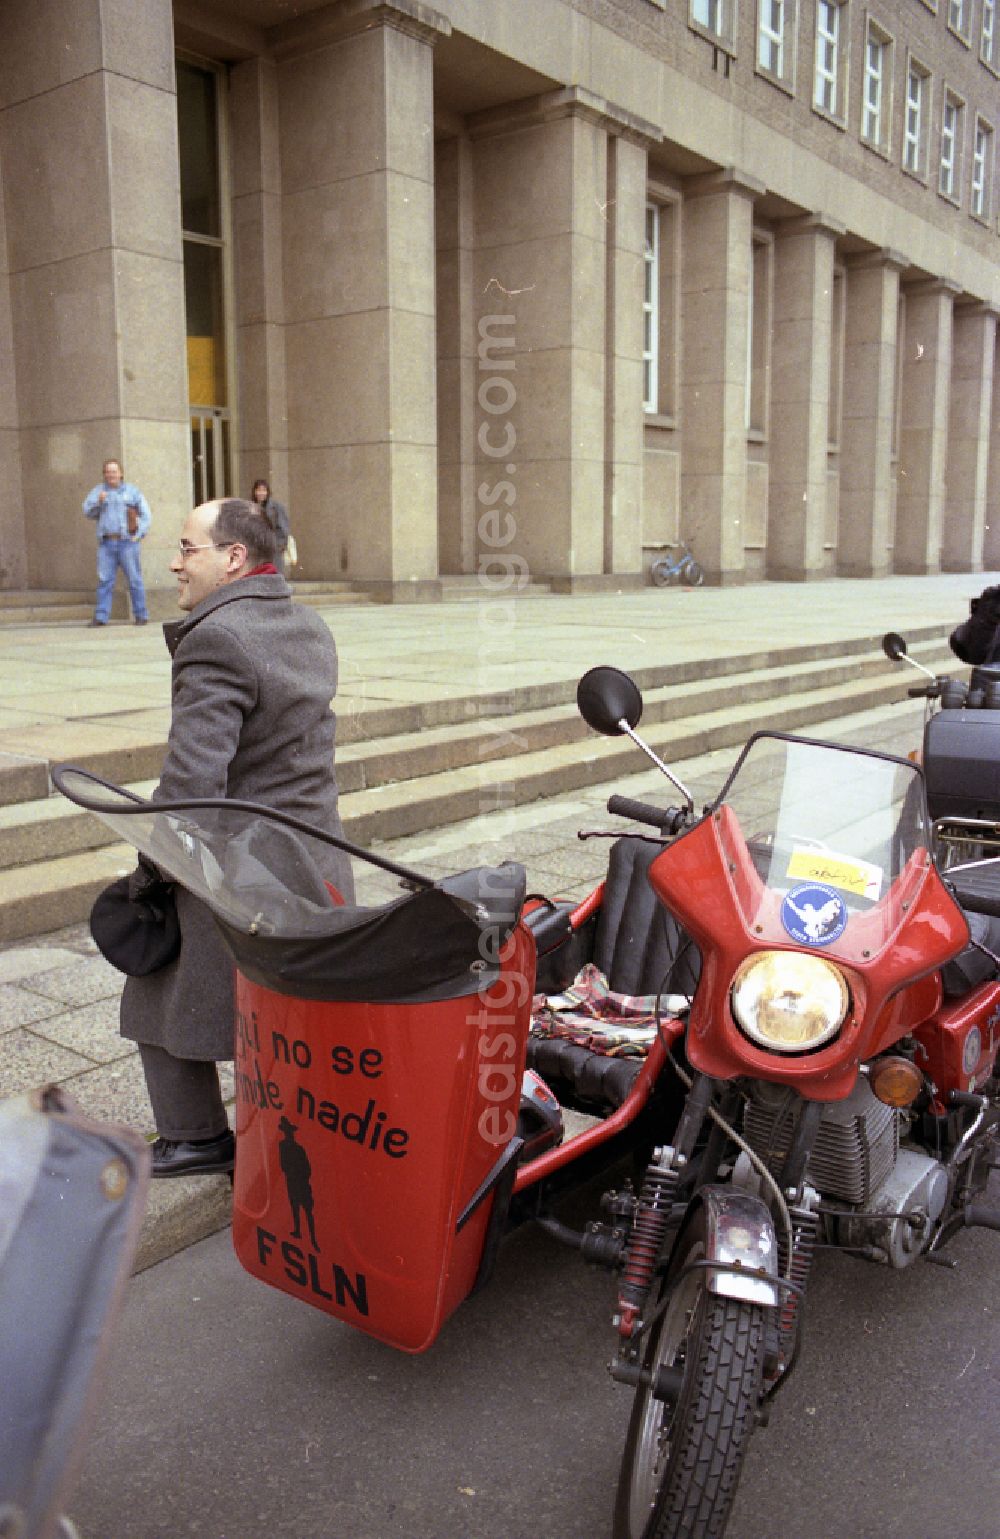 GDR photo archive: Berlin - PDS - left - politician Gregor Gysi drives with the sidecar of an MZ - motorcycle in front of the entrance of the former Central Committee of the SED and headquarters of the PDS (today's Foreign Office - Ministry of Foreign Affairs) in the district Mitte in Berlin East Berlin in the area of the former GDR, German Democratic Republic